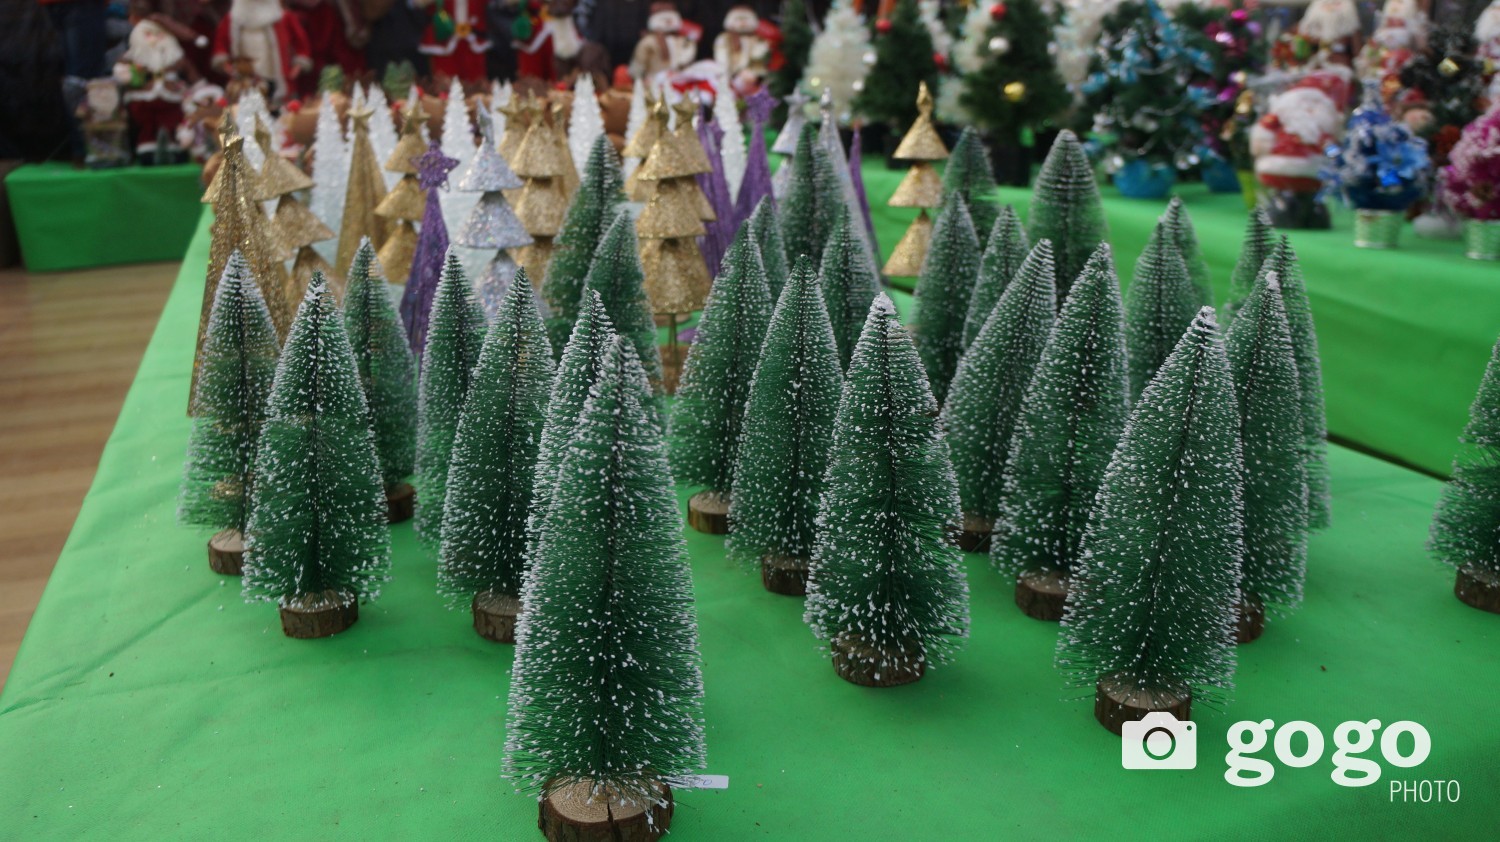 Prices for new mini desk top artificial Christmas tree is ranging between MNT 5600-59.000